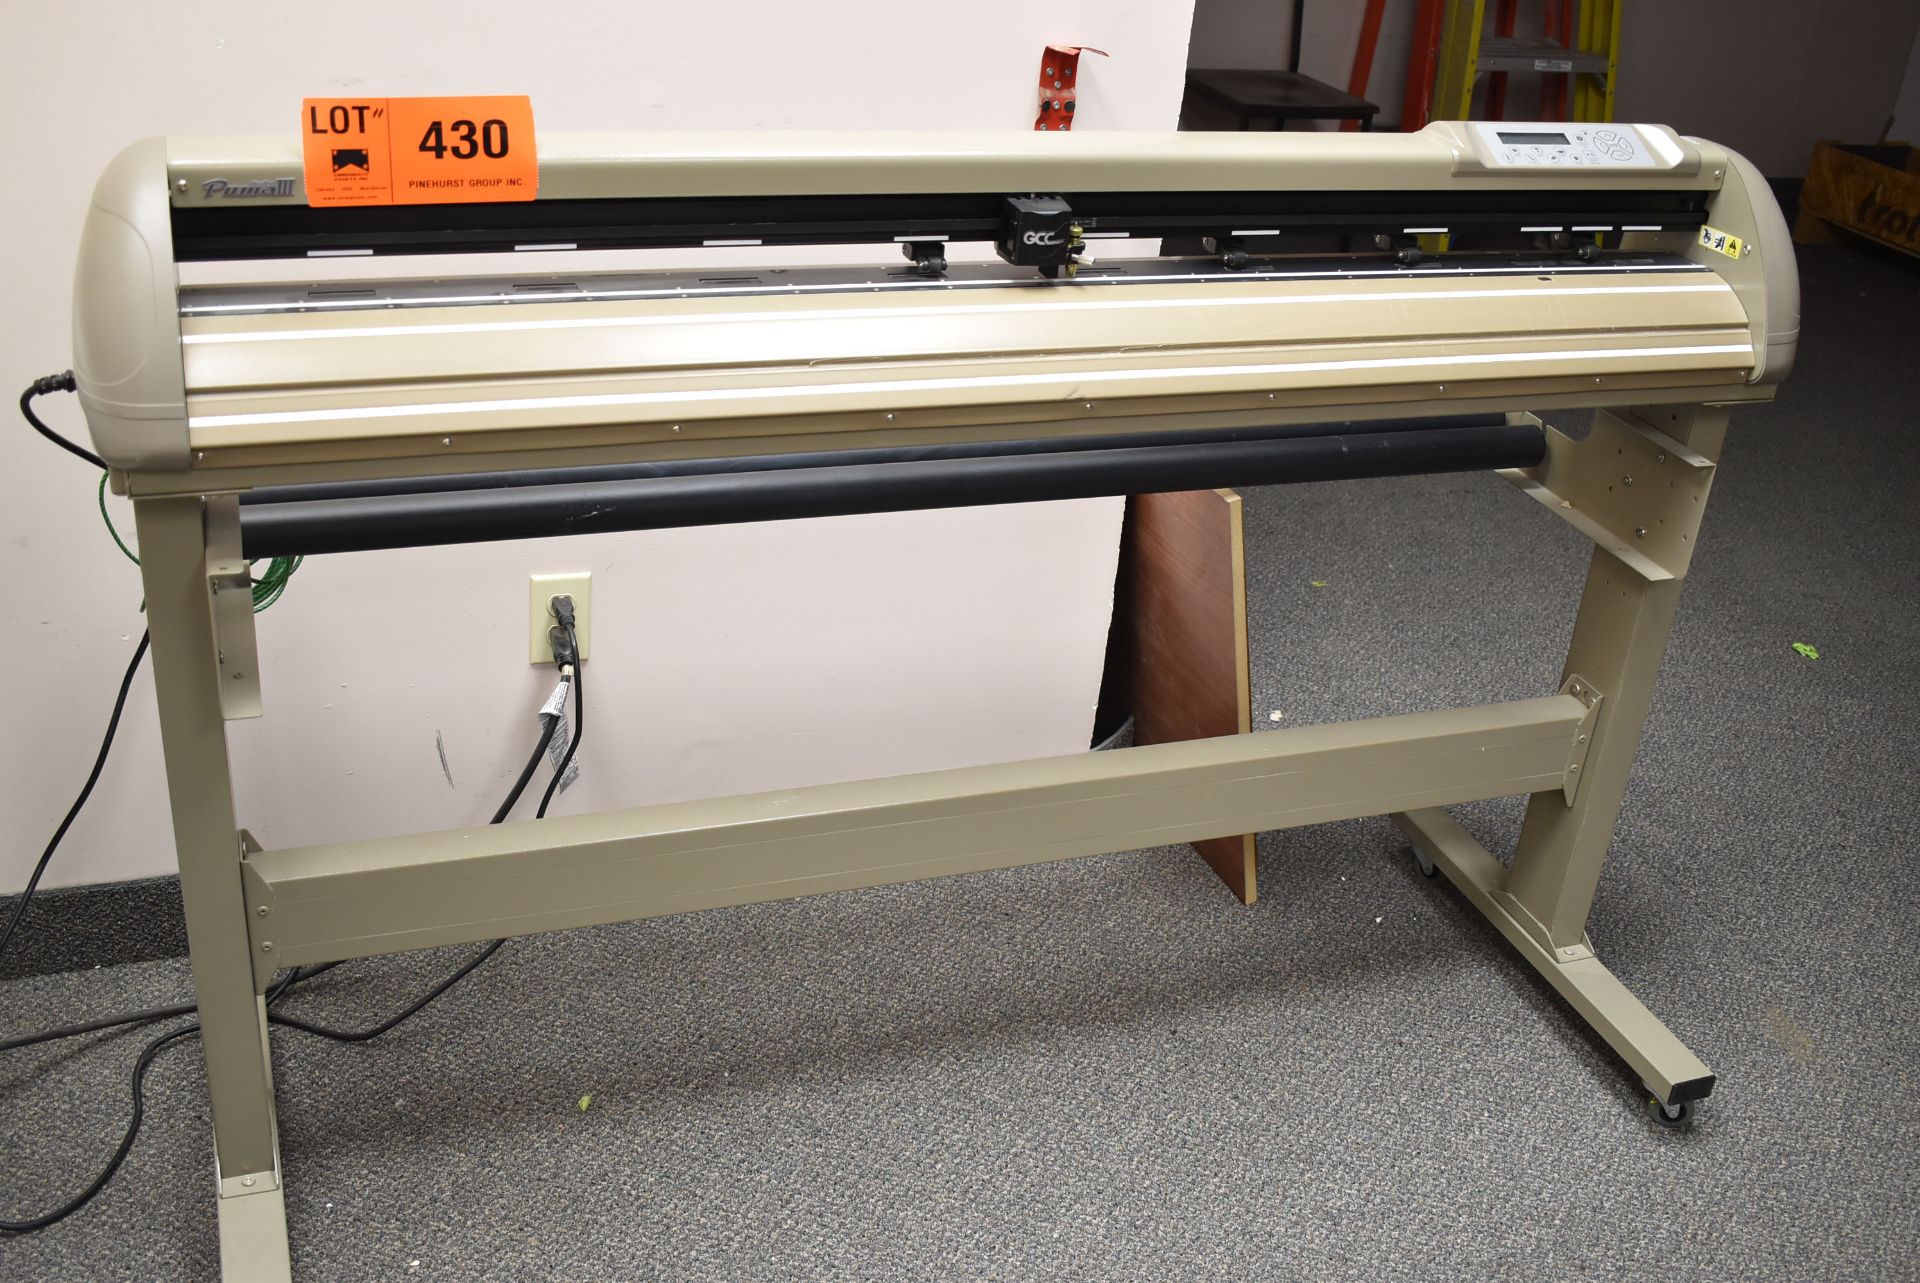 GCC PUMA III VINYL CUTTER [RIGGING FEES FOR LOT #430 - $25 USD PLUS APPLICABLE TAXES]